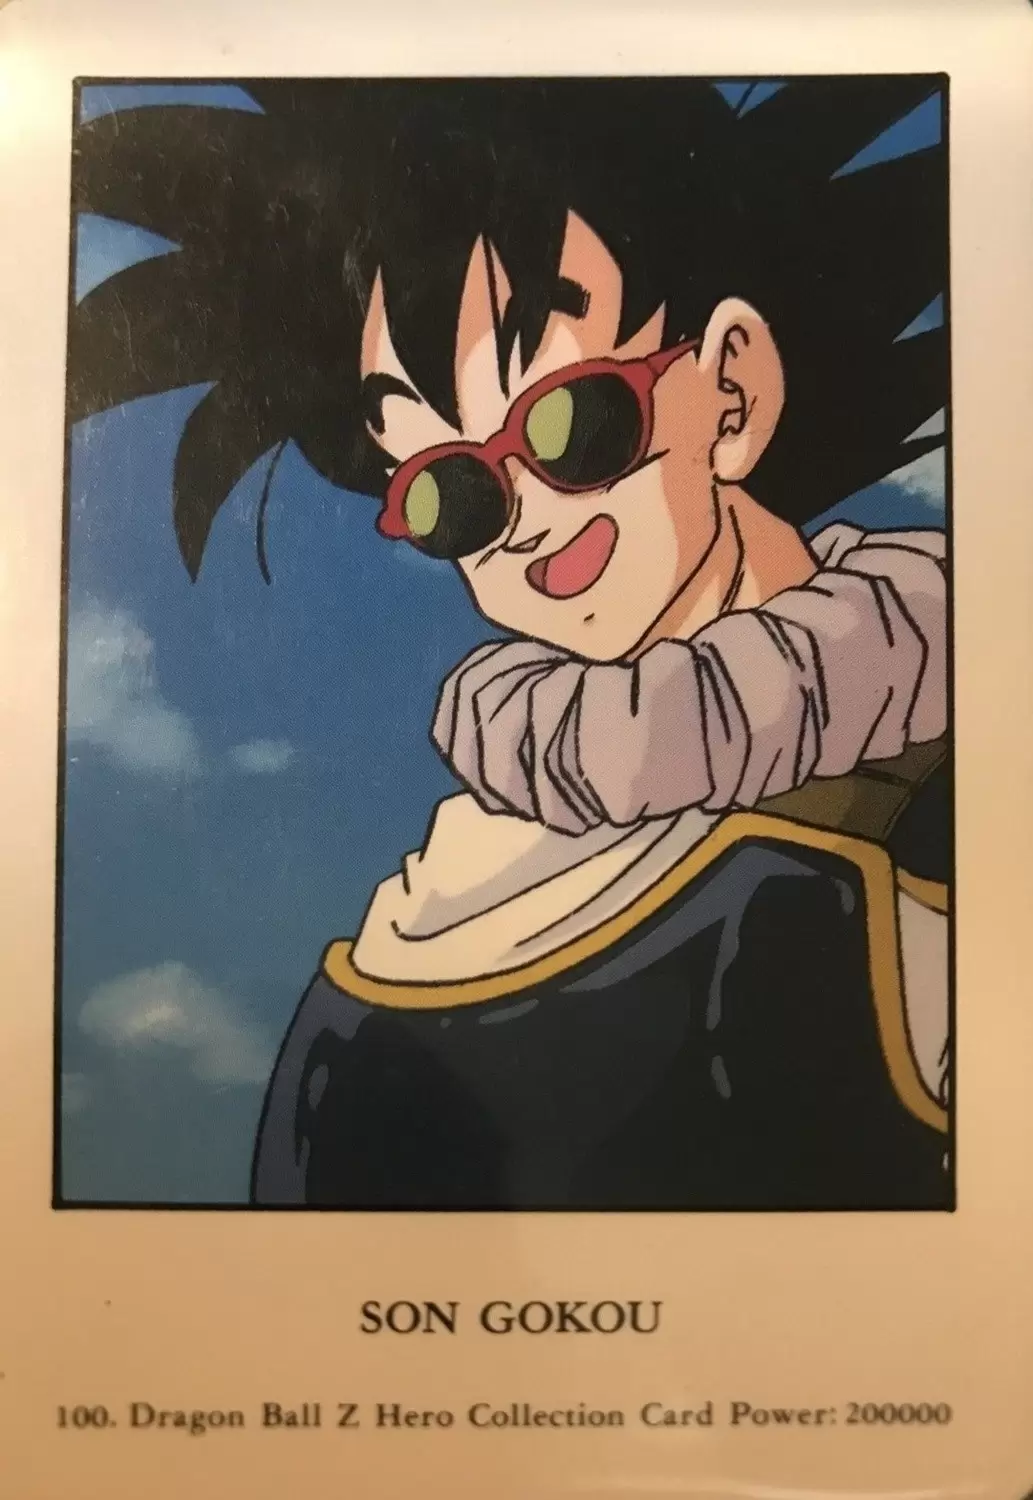 Card number 100 - Dragon Ball Z Hero Collection Series Part 1 Dragon Ball  trading card 100